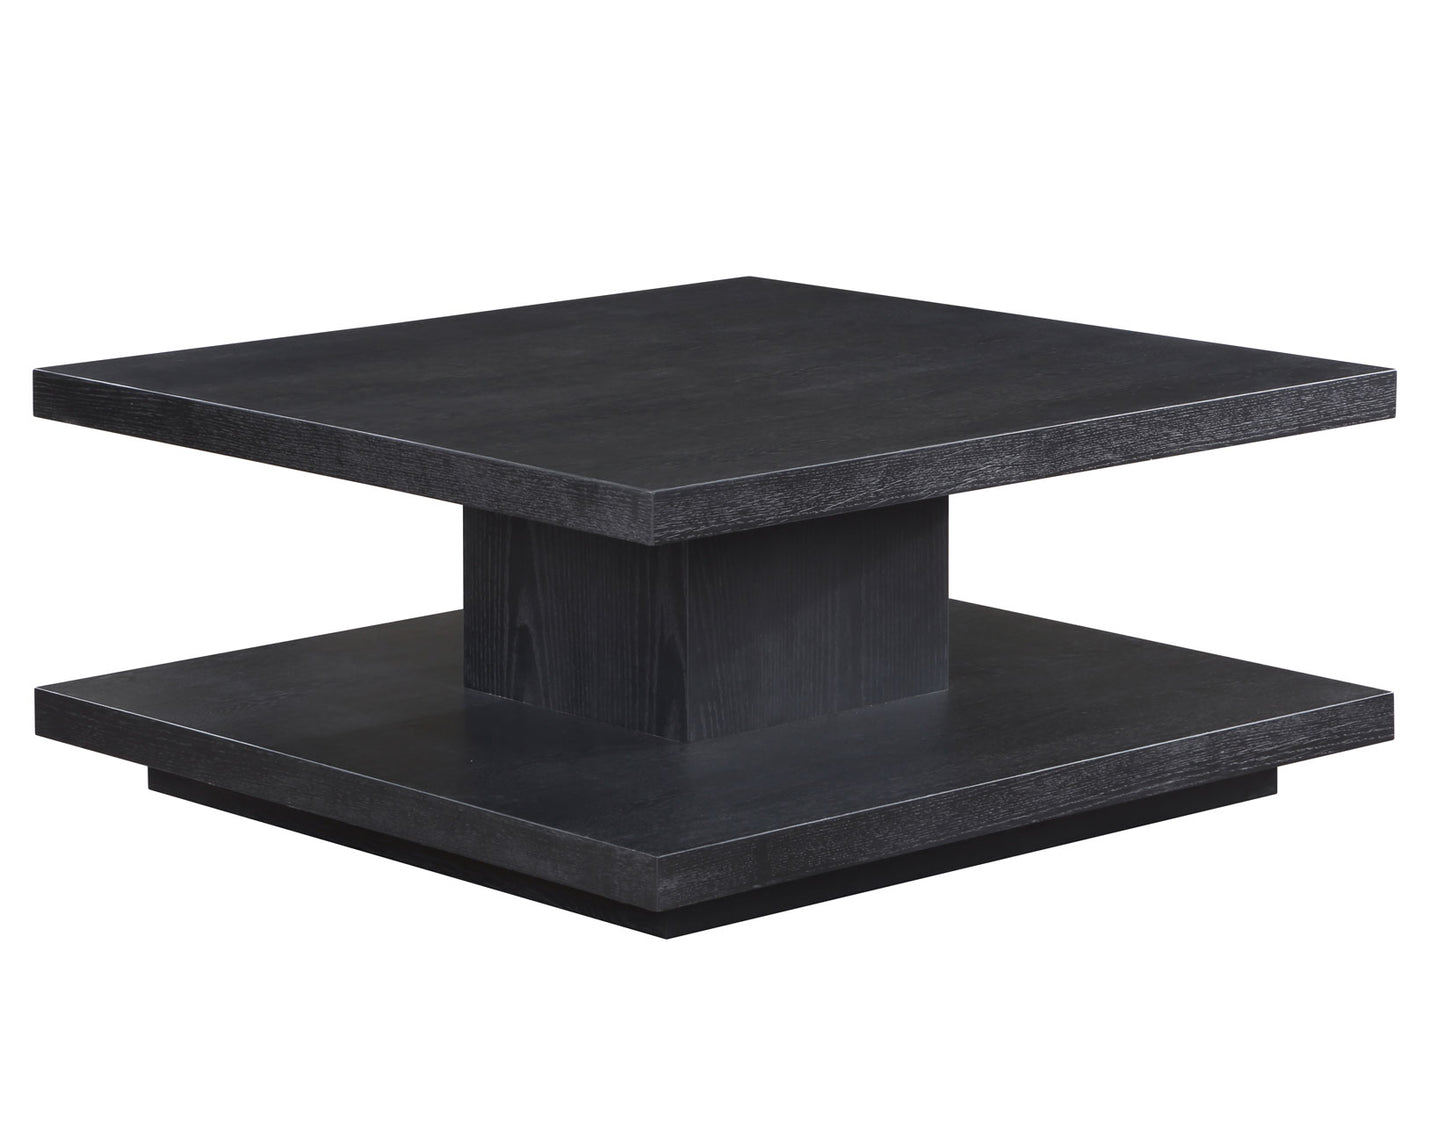 Canyon 3-Piece Table Set, Black
(Cocktail Table & 2 End Tables)